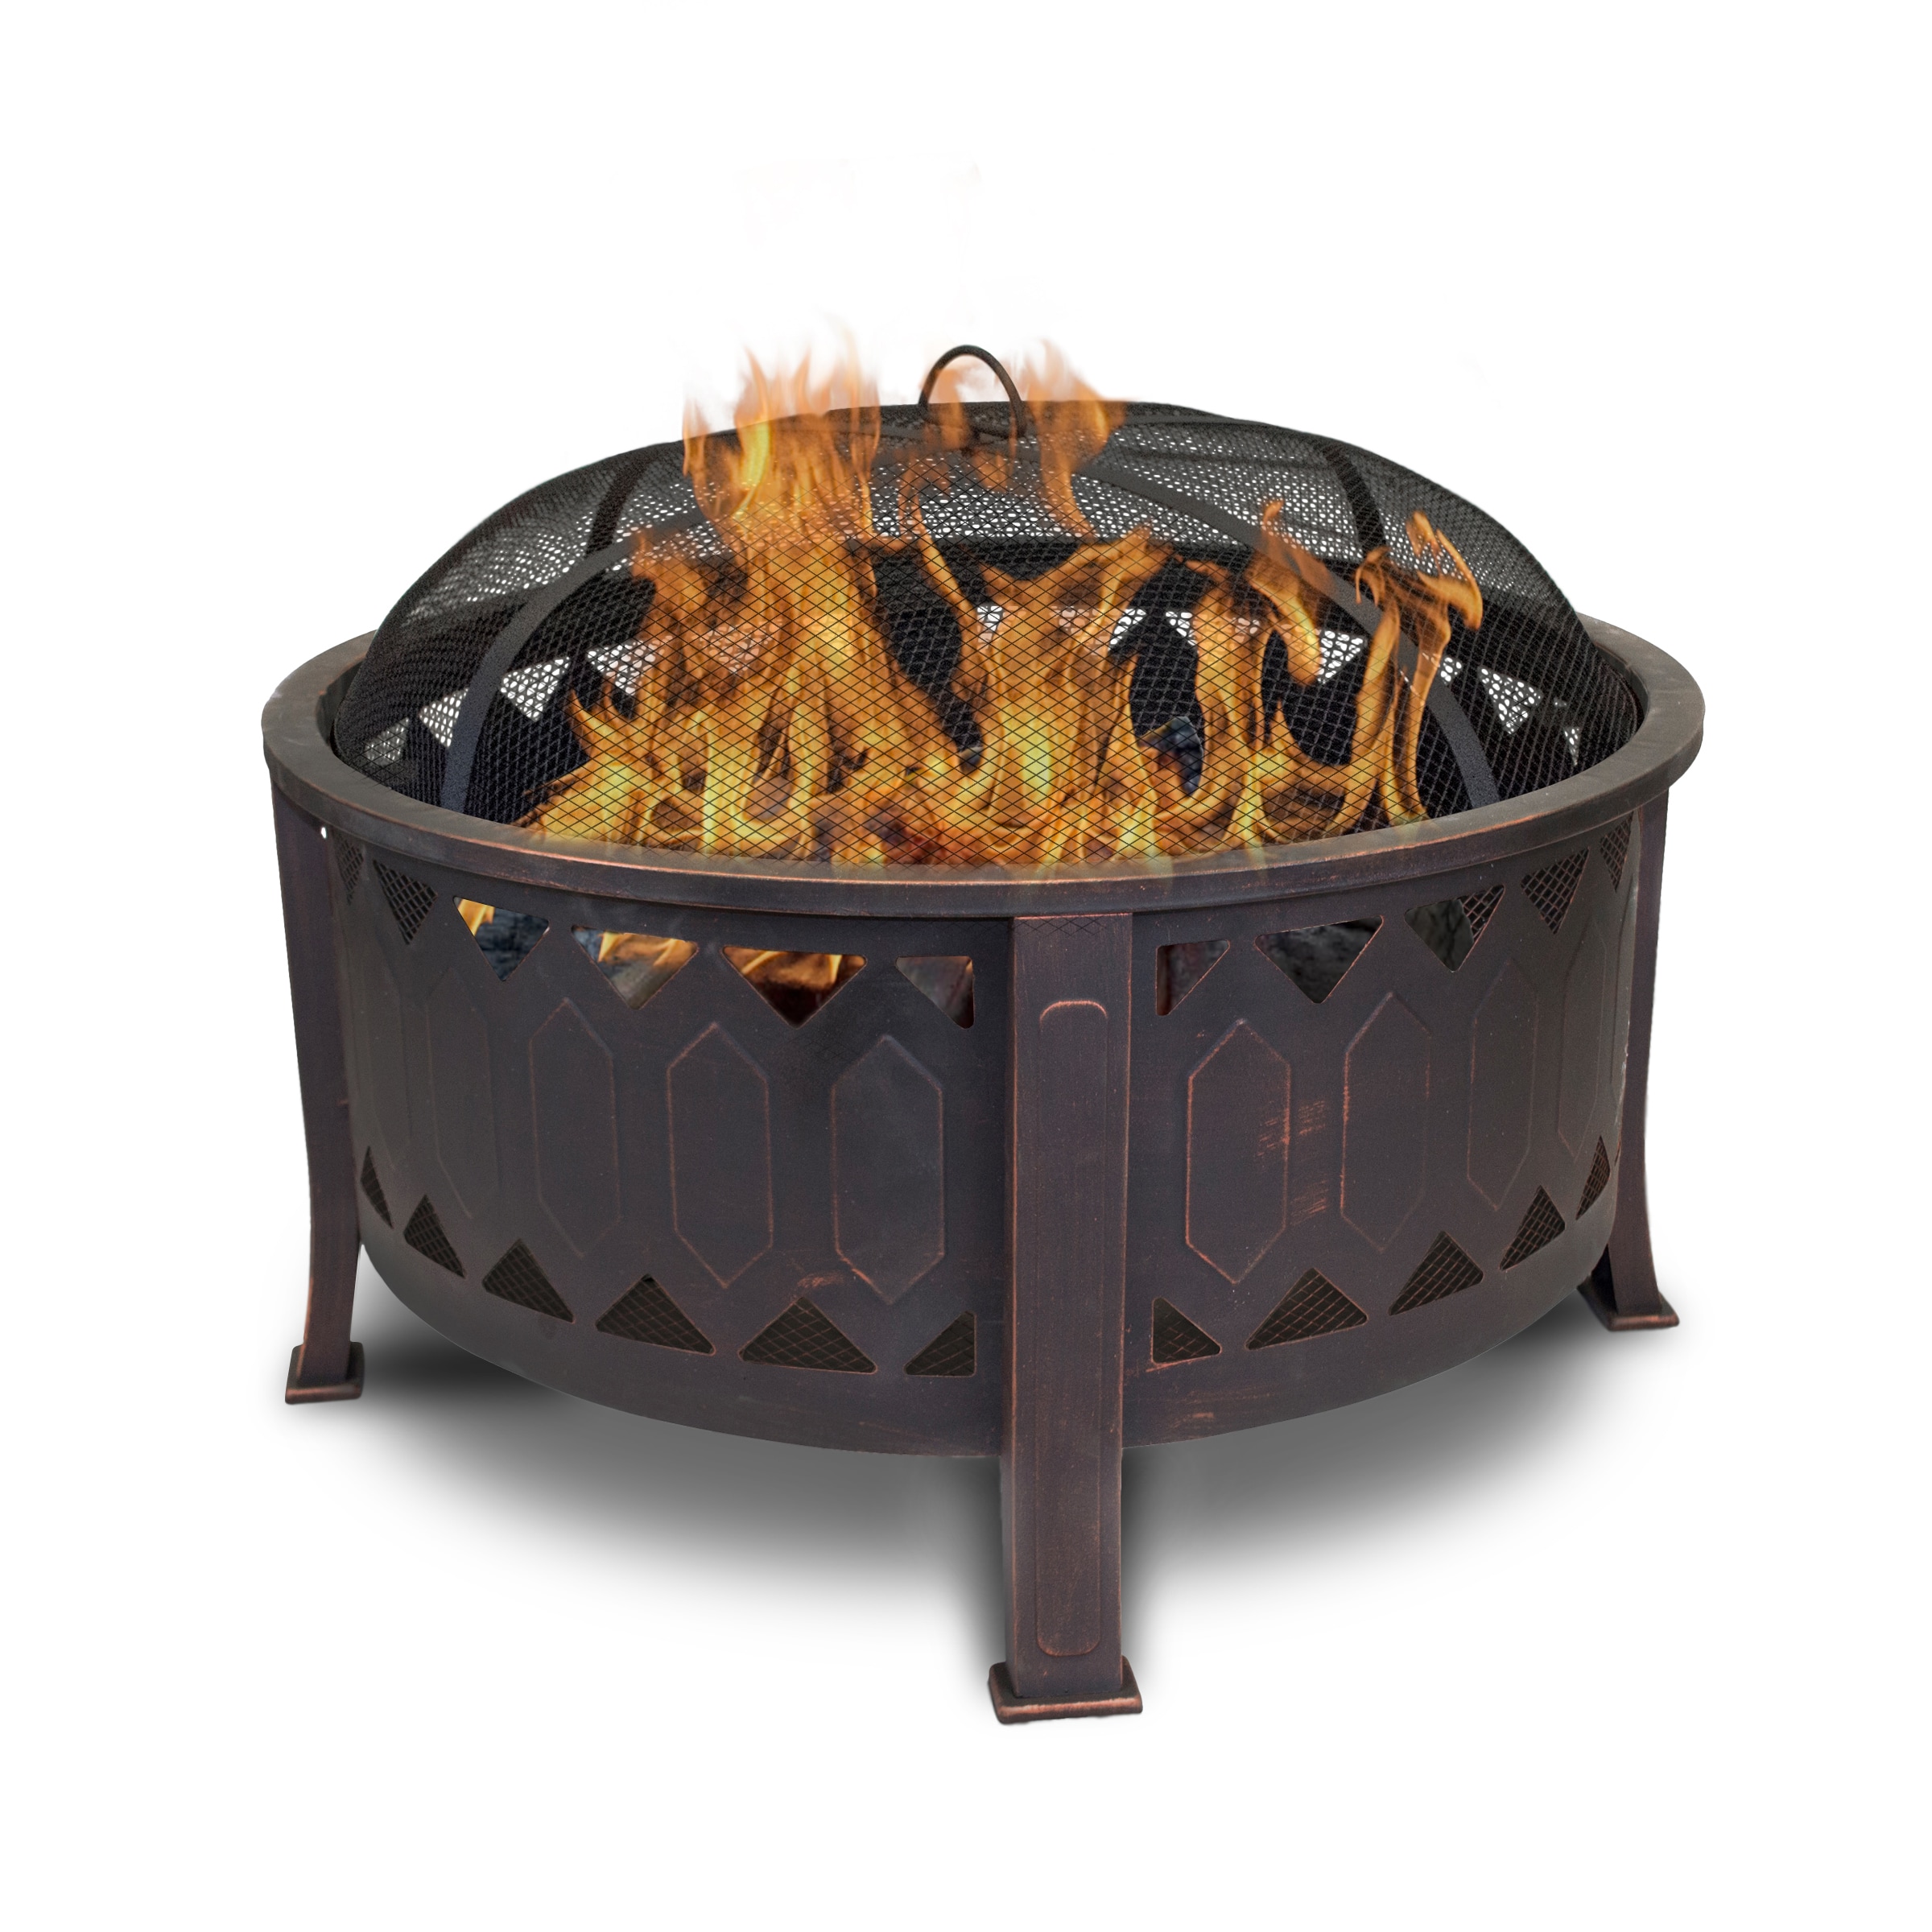 A Furniture Classics 29.75-in W Bronze Rubbed Oil Steel Wood-Burning Fire  Pit in the Wood-Burning Fire Pits department at Lowes.com